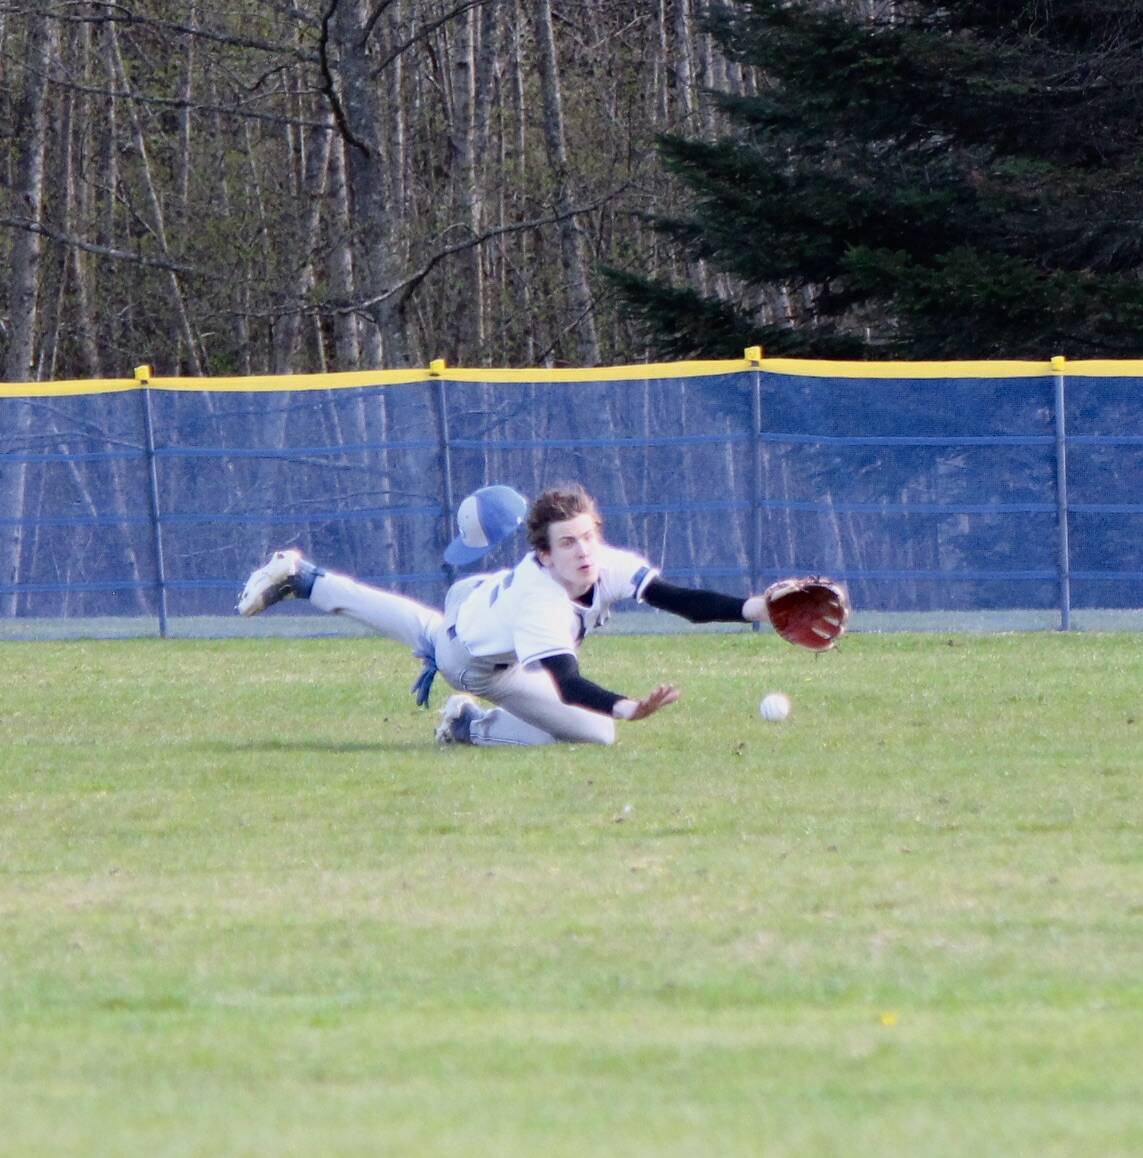 Corey Wiscomb photo
Orcas outfielder Jefferson Freeman makes a diving grab for a bouncing line drive in the Coupeville game.